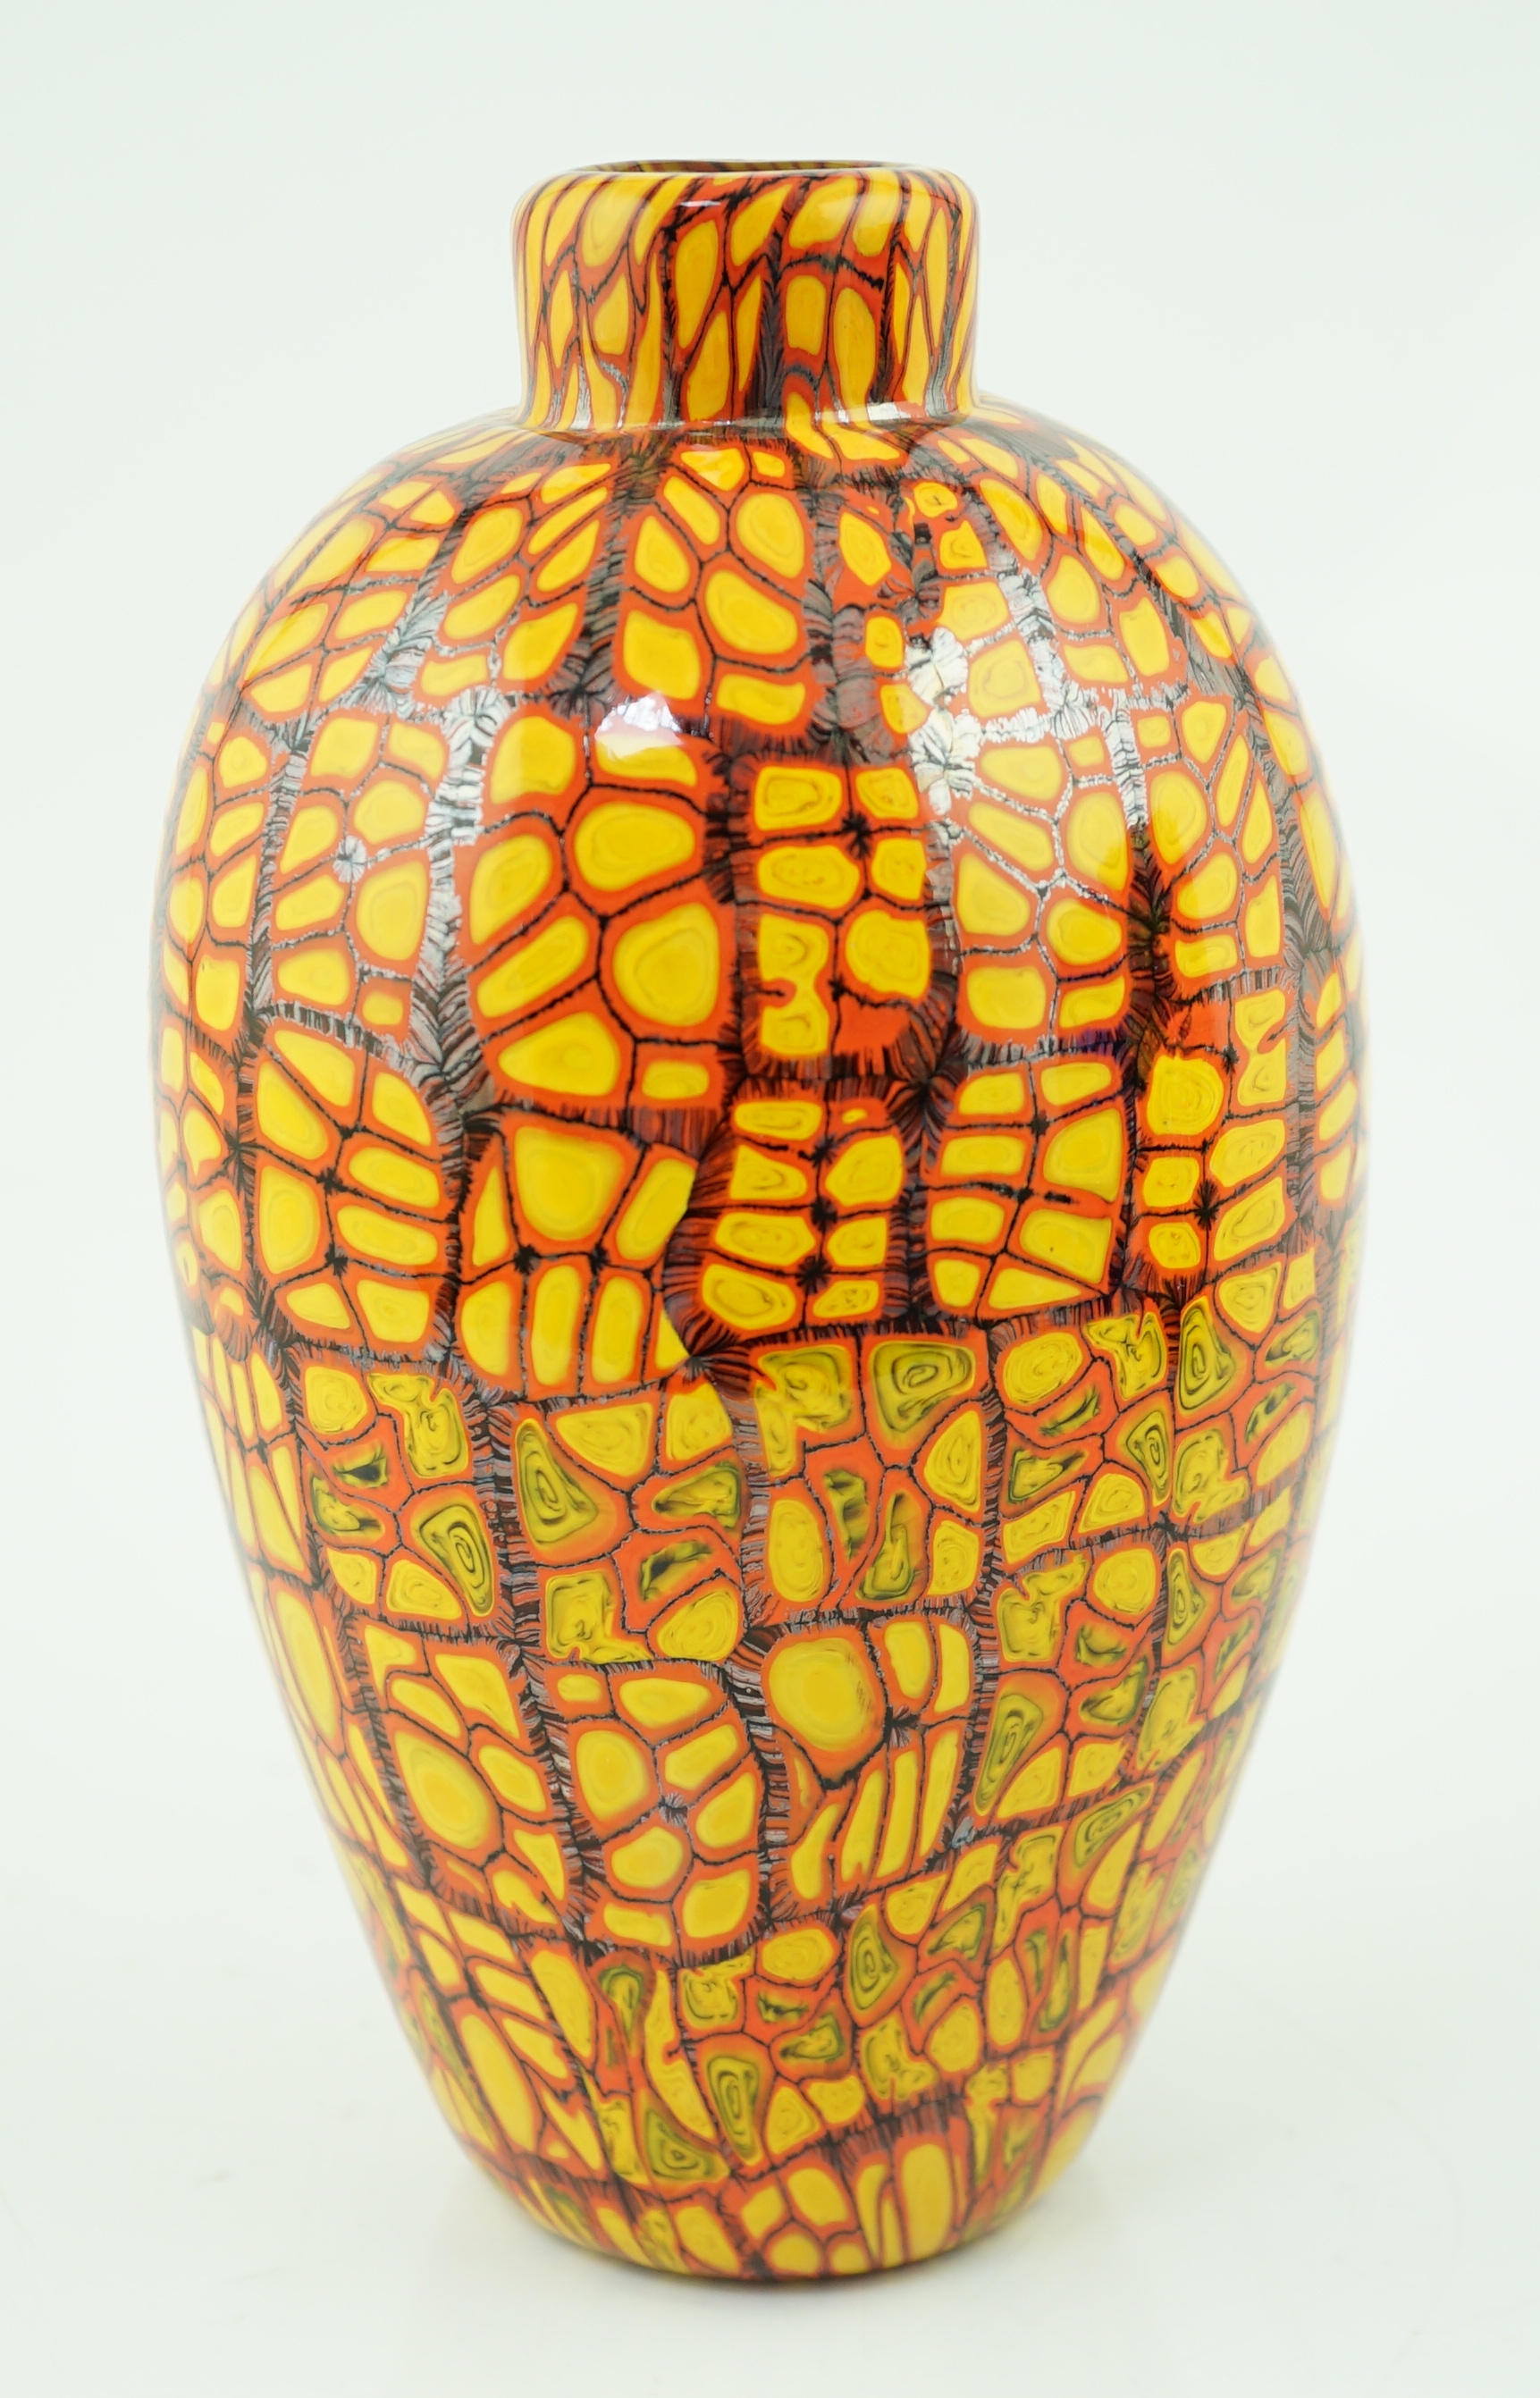 Vittorio Ferro (1932-2012) A Murano glass Murrine vase, in orange, red and black, signed, 26cm, Please note this lot attracts an additional import tax of 20% on the hammer price